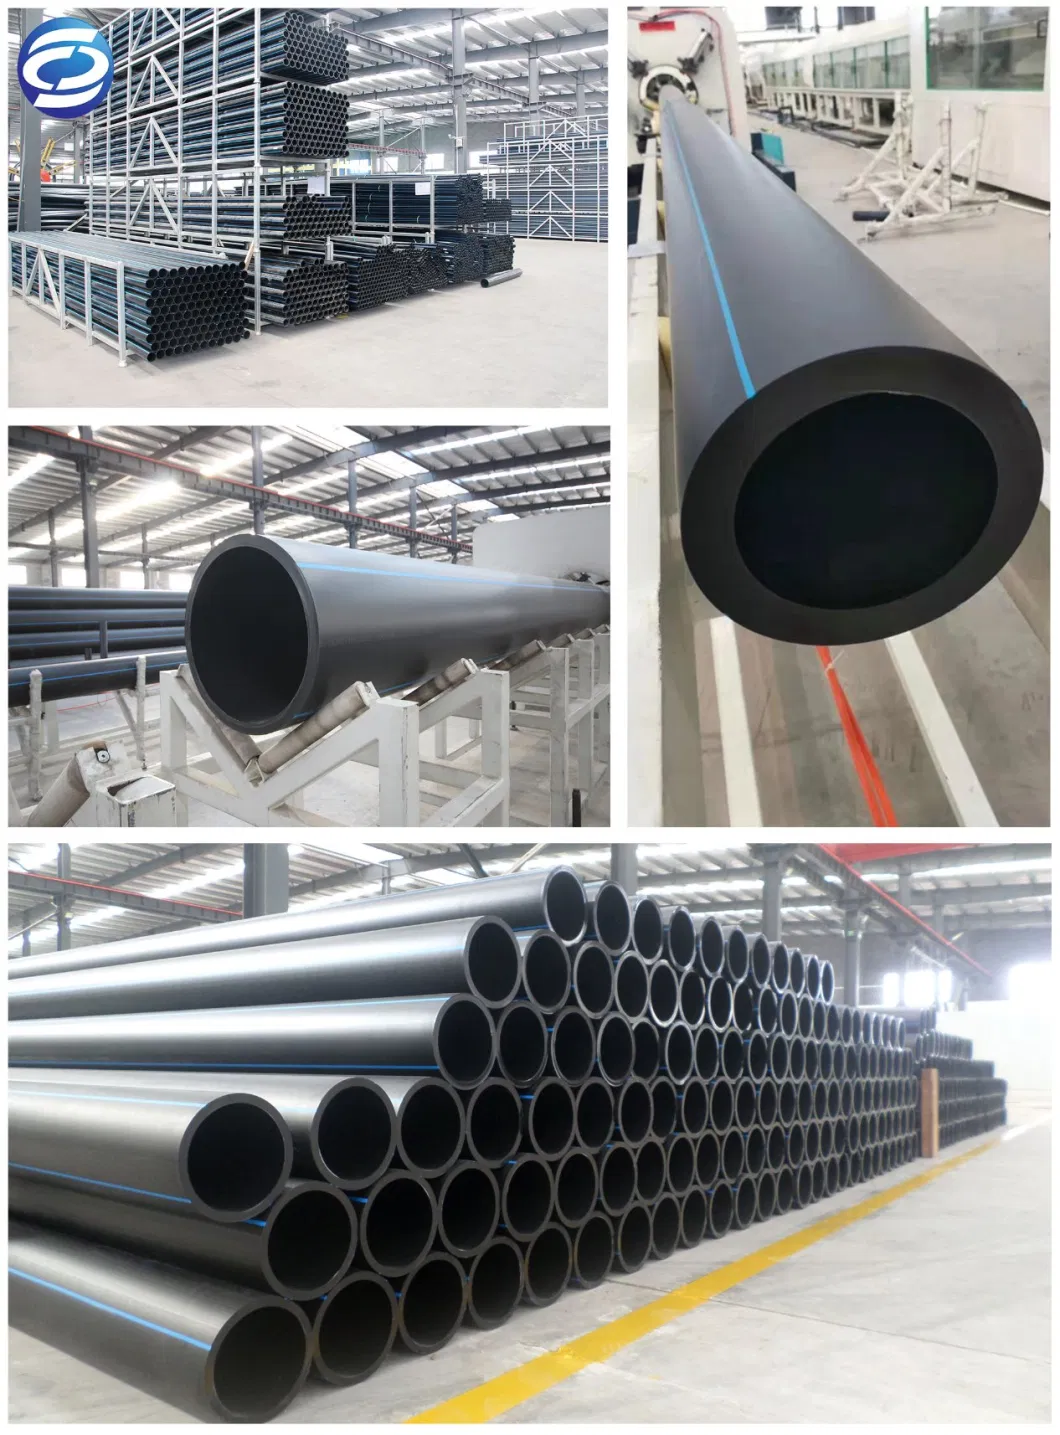 SDR26, SDR33 Plastic Black PE PVC HDPE Pipe for Water System/Wire and Cable Pipe/Drainpipe